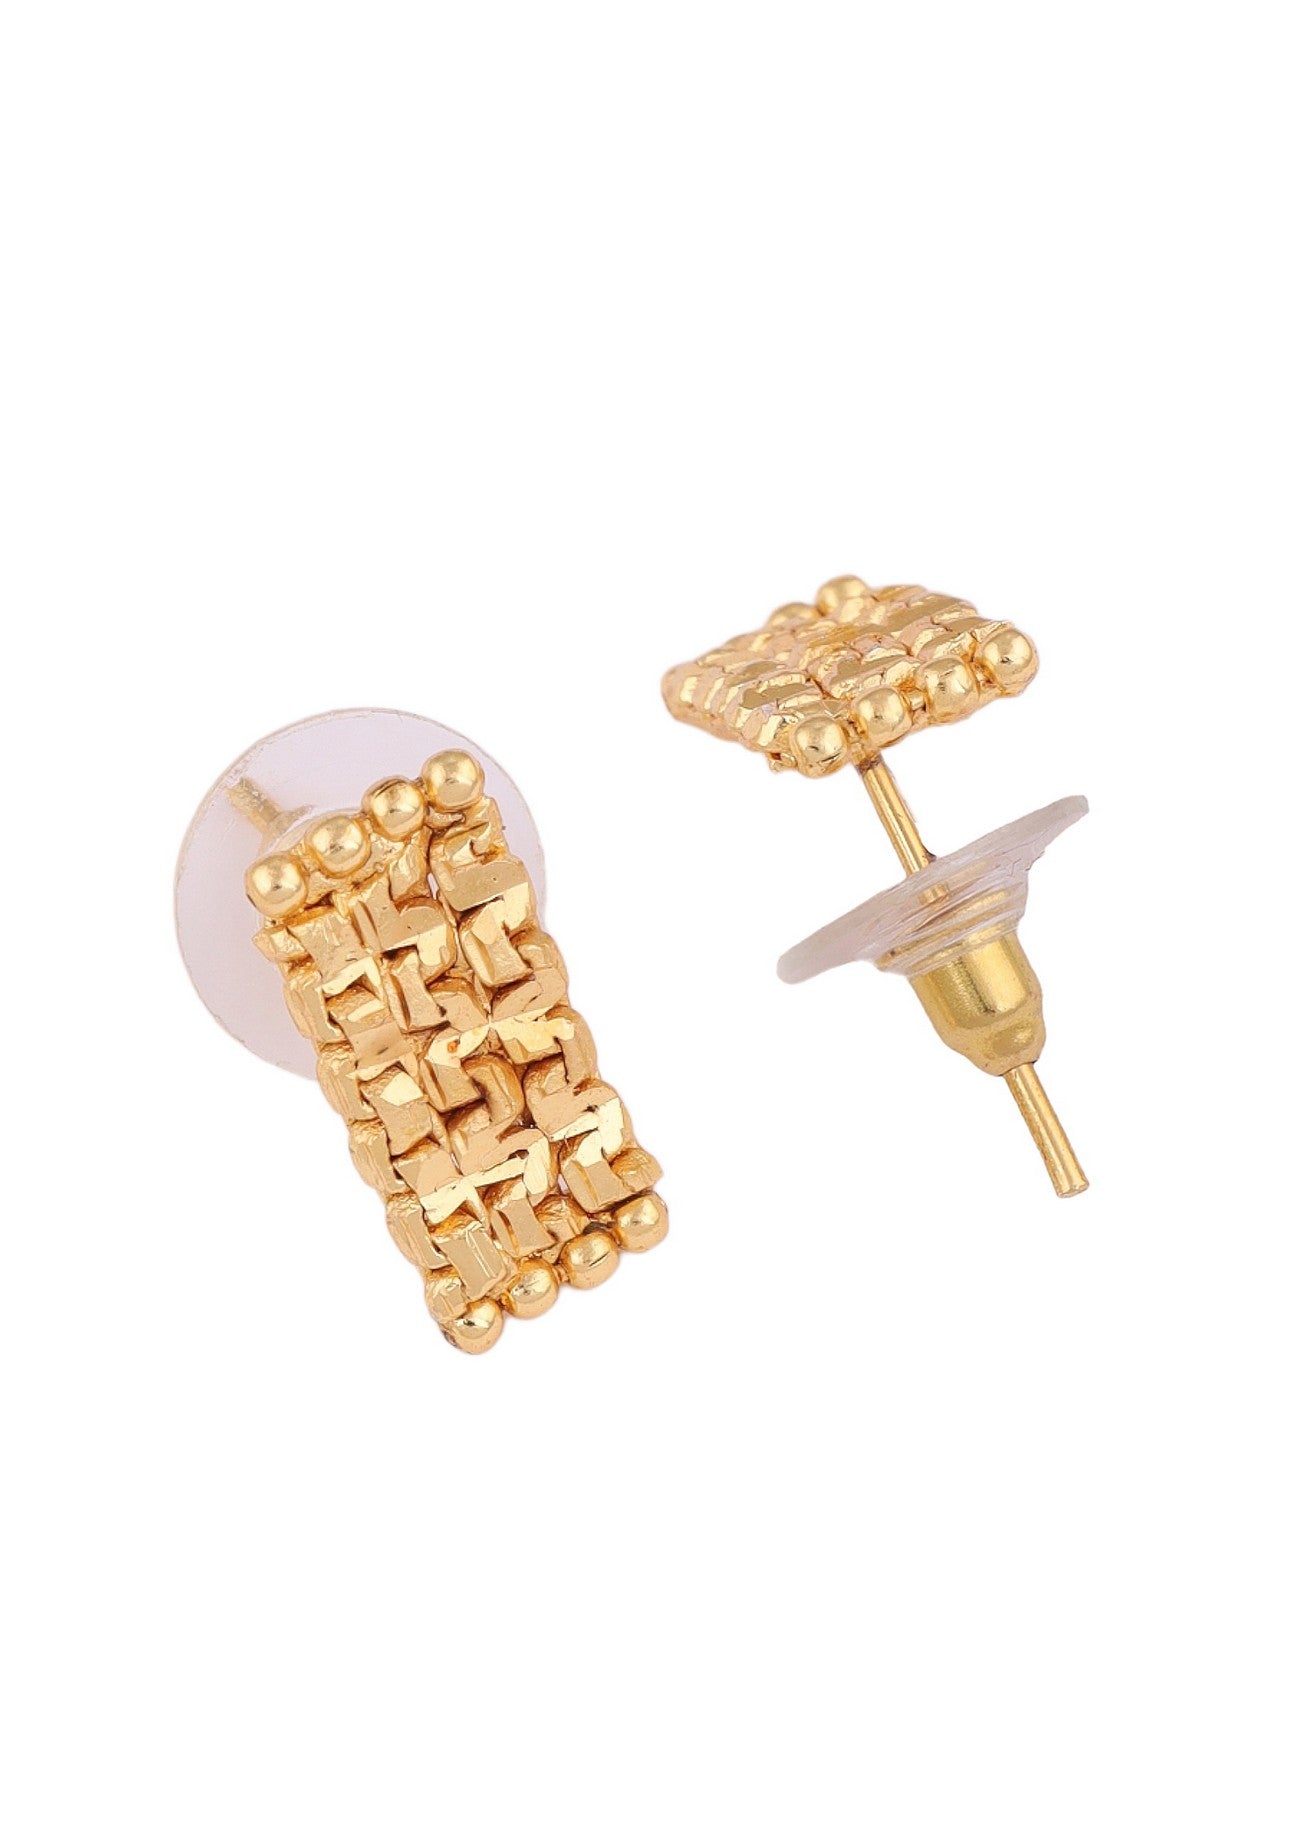 Gold-Plated Handmade Kalkati Set With Matching Earring